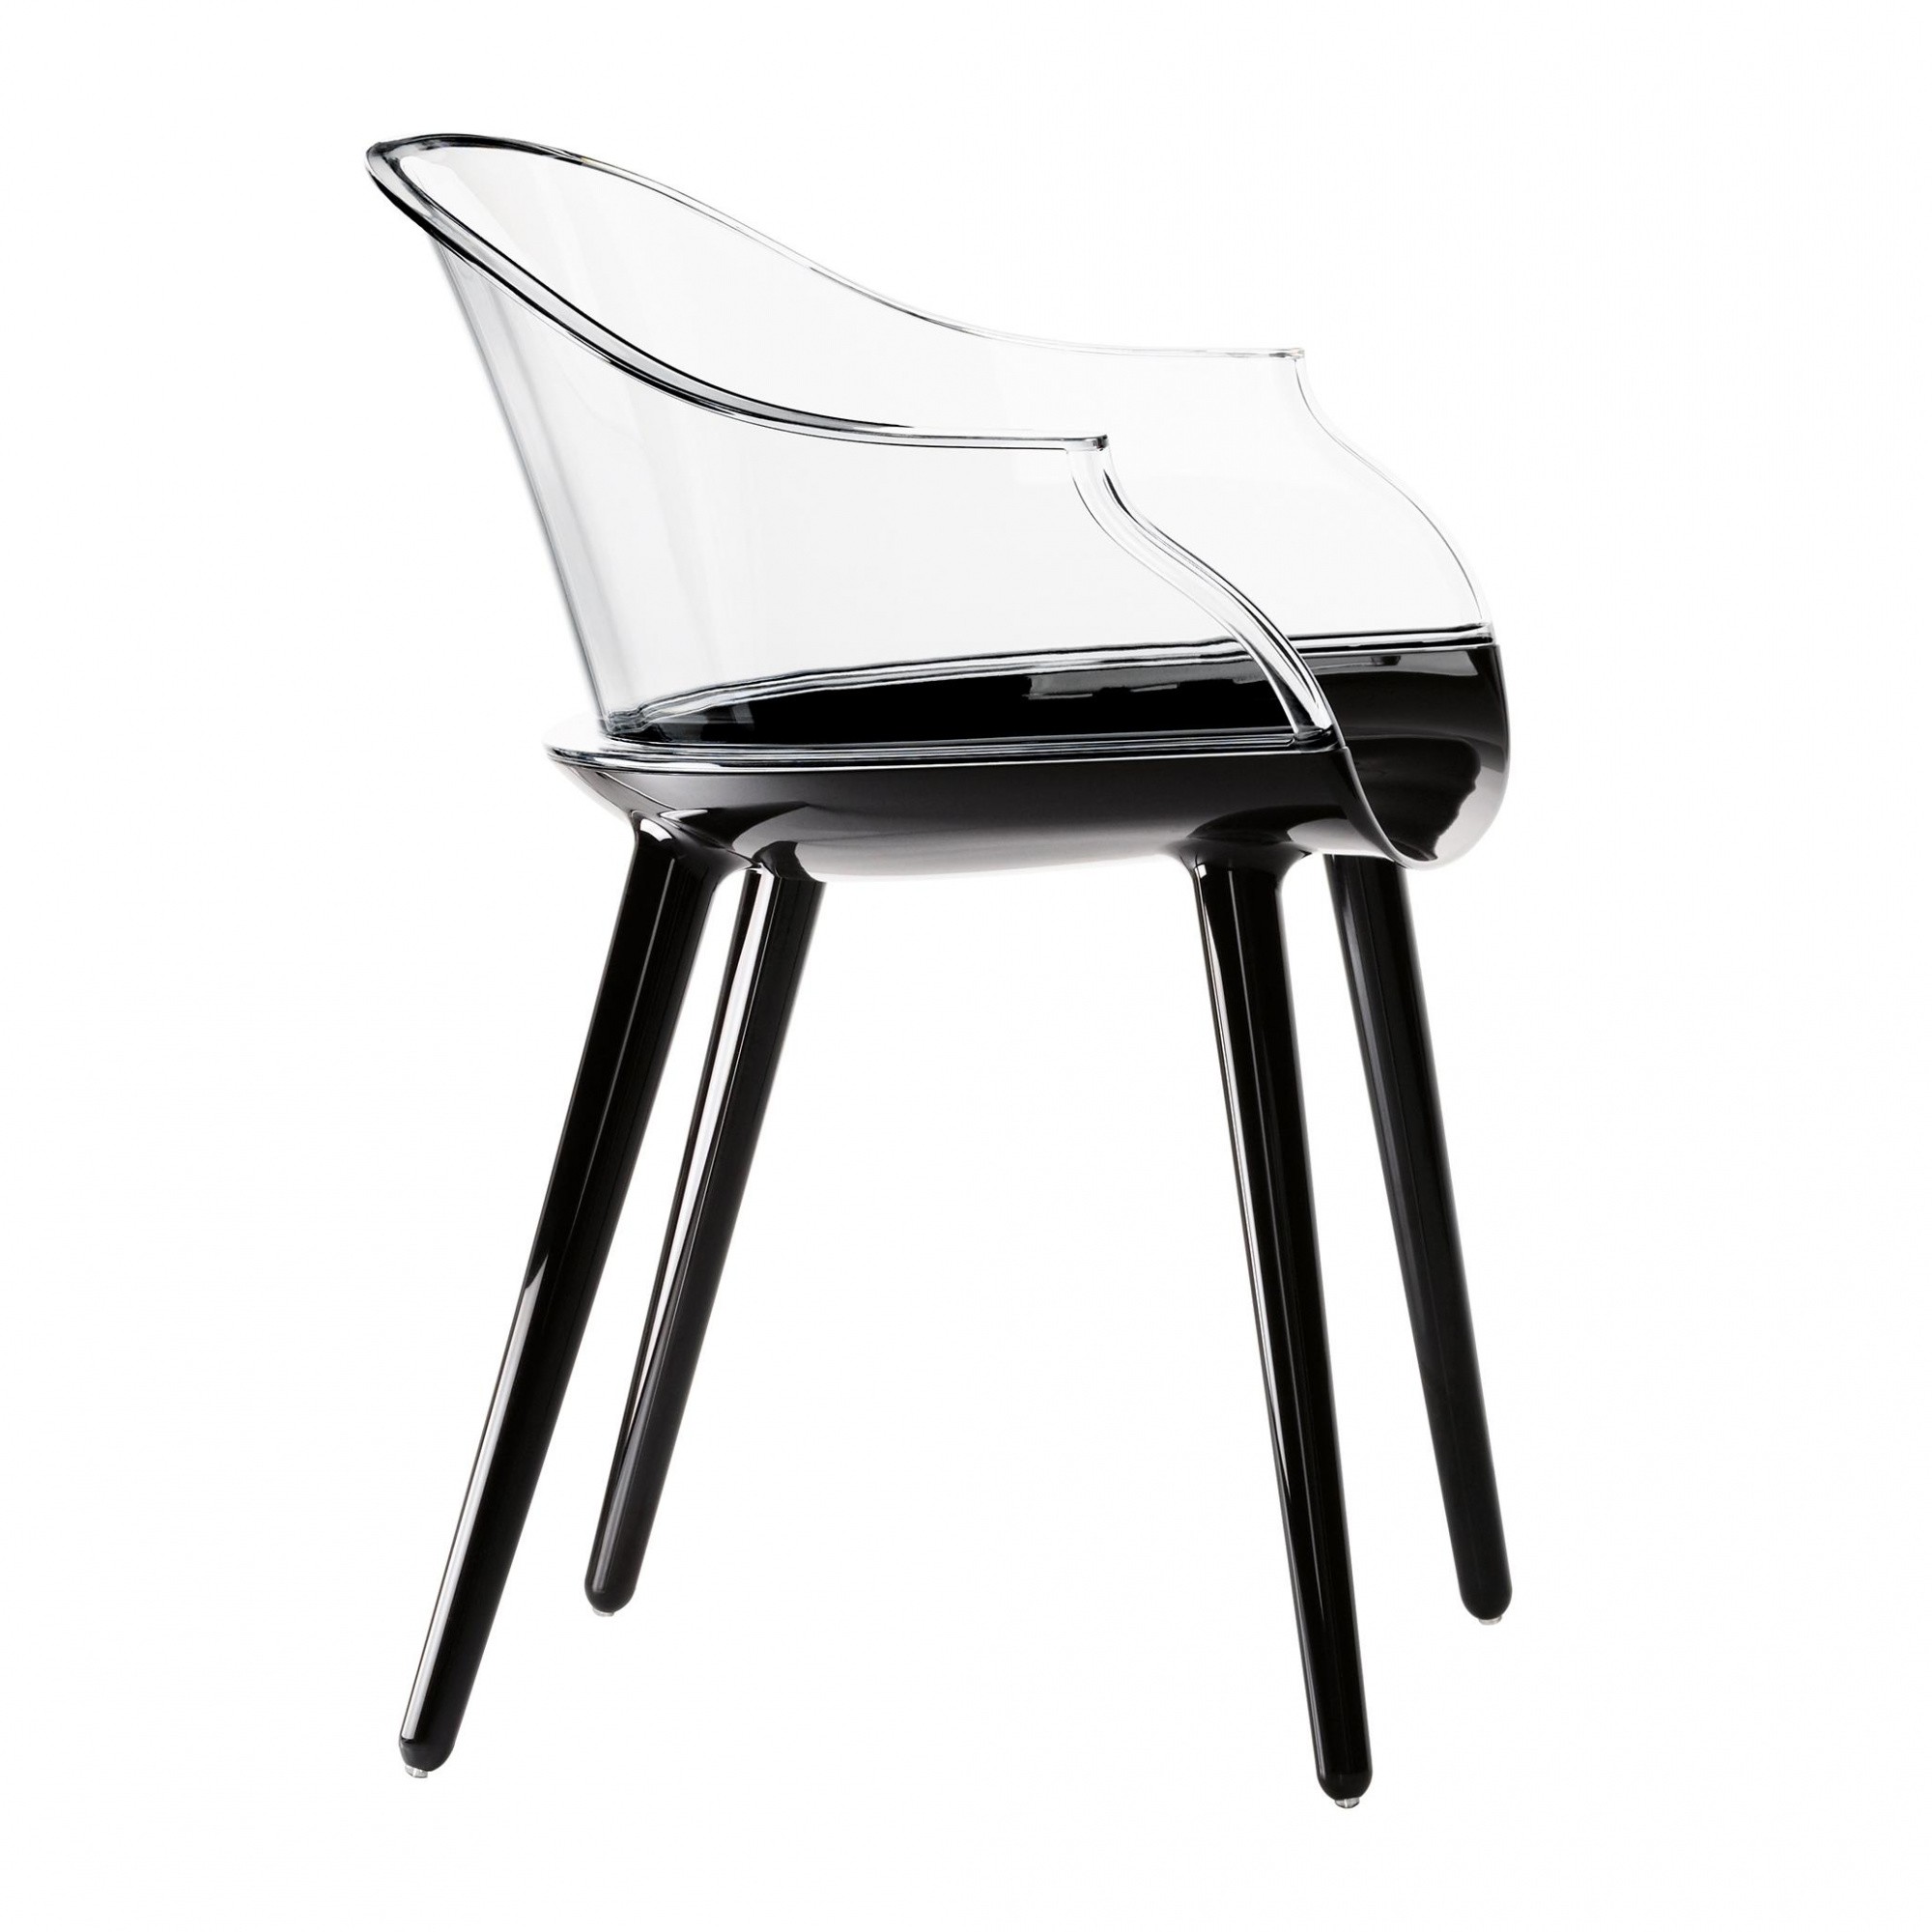 seat glossy black / back clear transparent